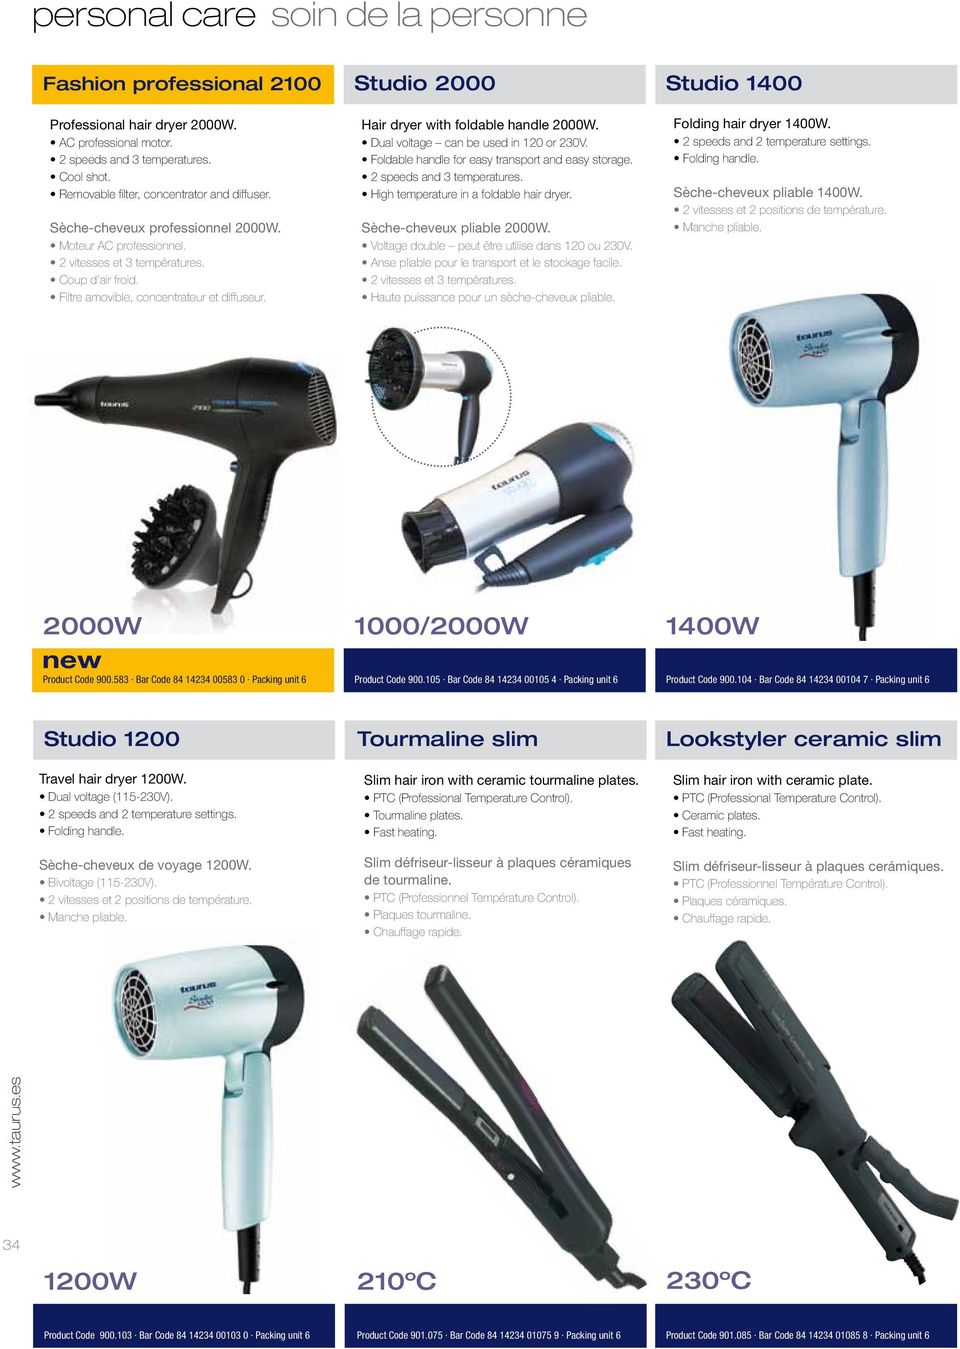 Studio 2000 Hair dryer with foldable handle 2000W. Dual voltage can be used in 120 or 230V. Foldable handle for easy transport and easy storage. 2 speeds and 3 temperatures.